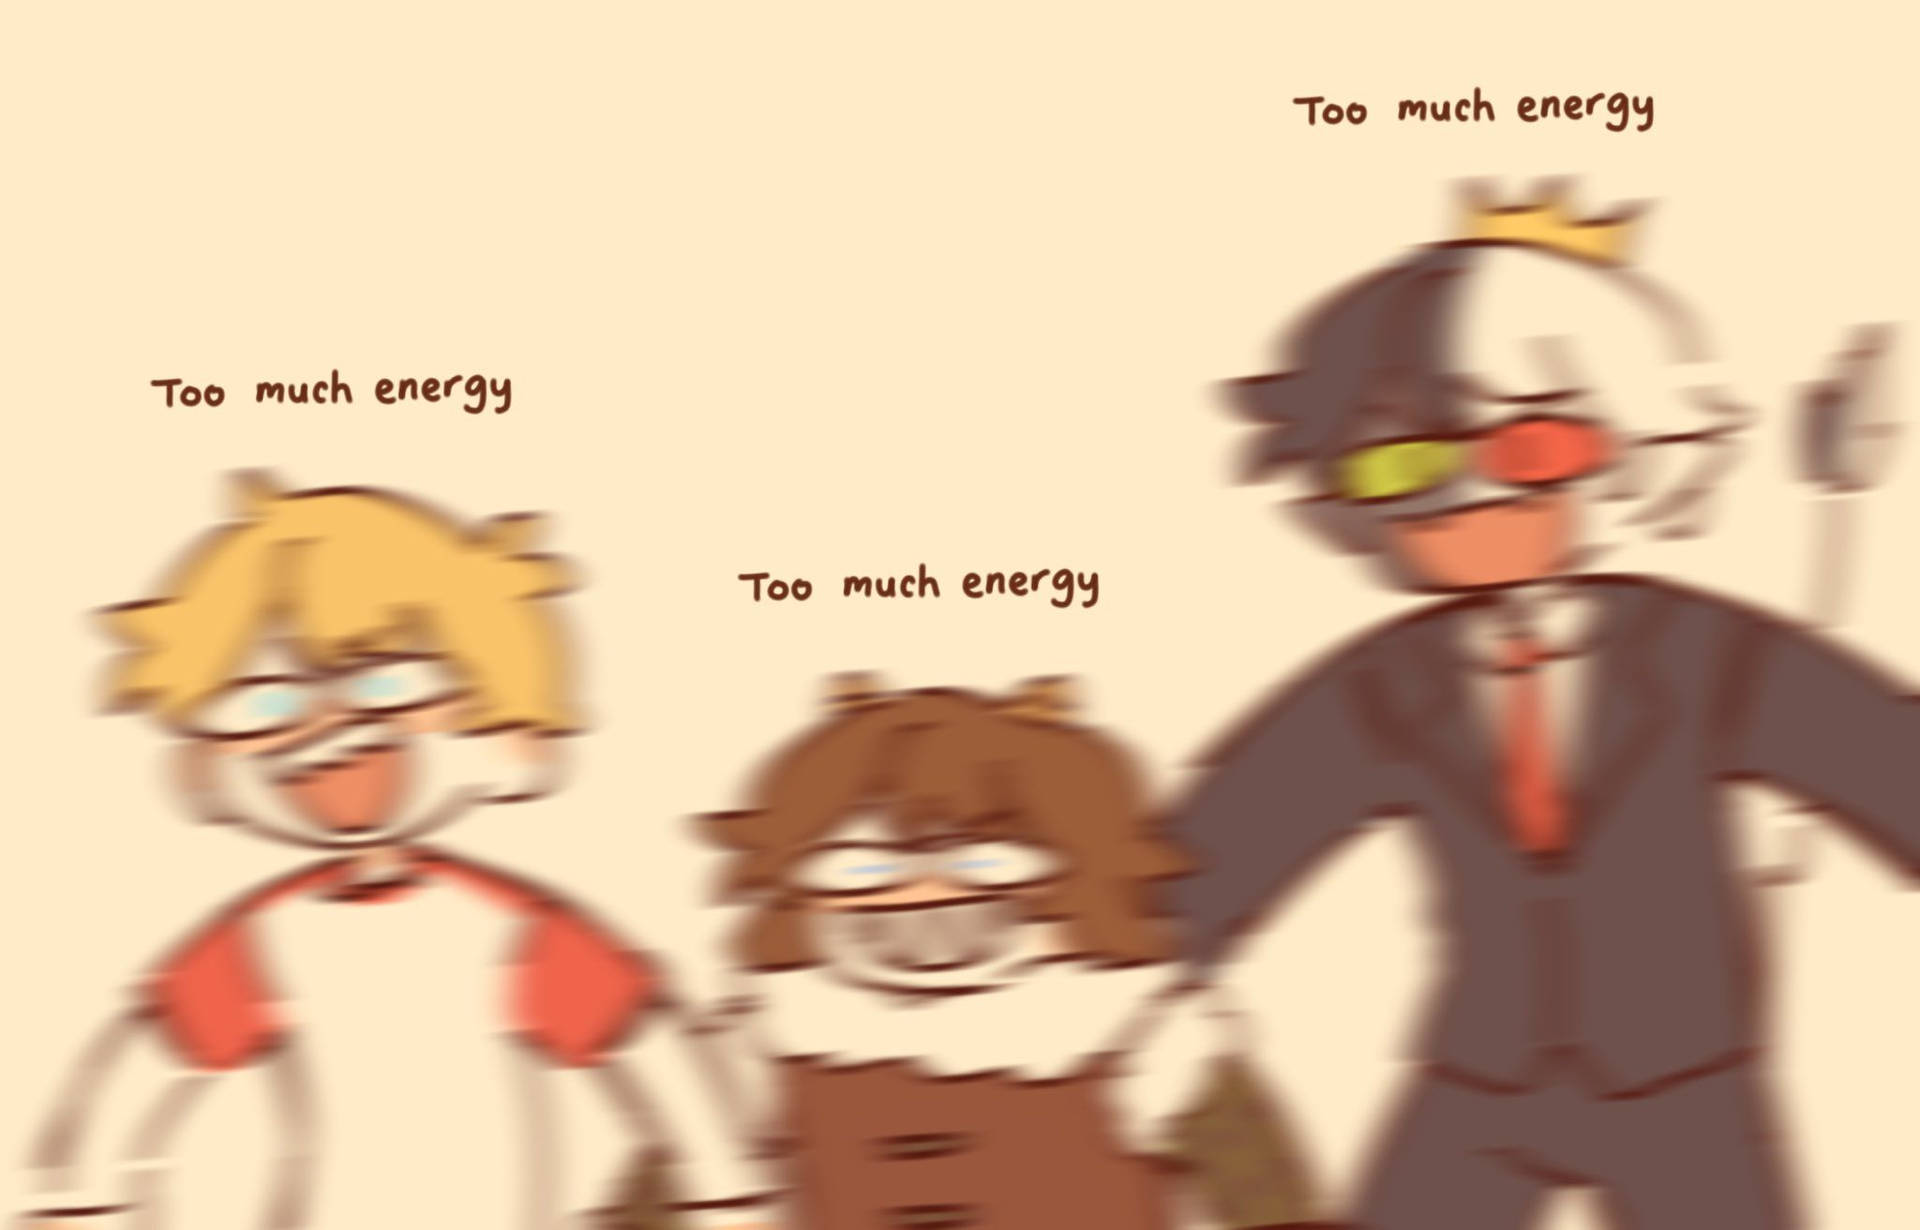 Bench Trio Too Much Energy Meme Background